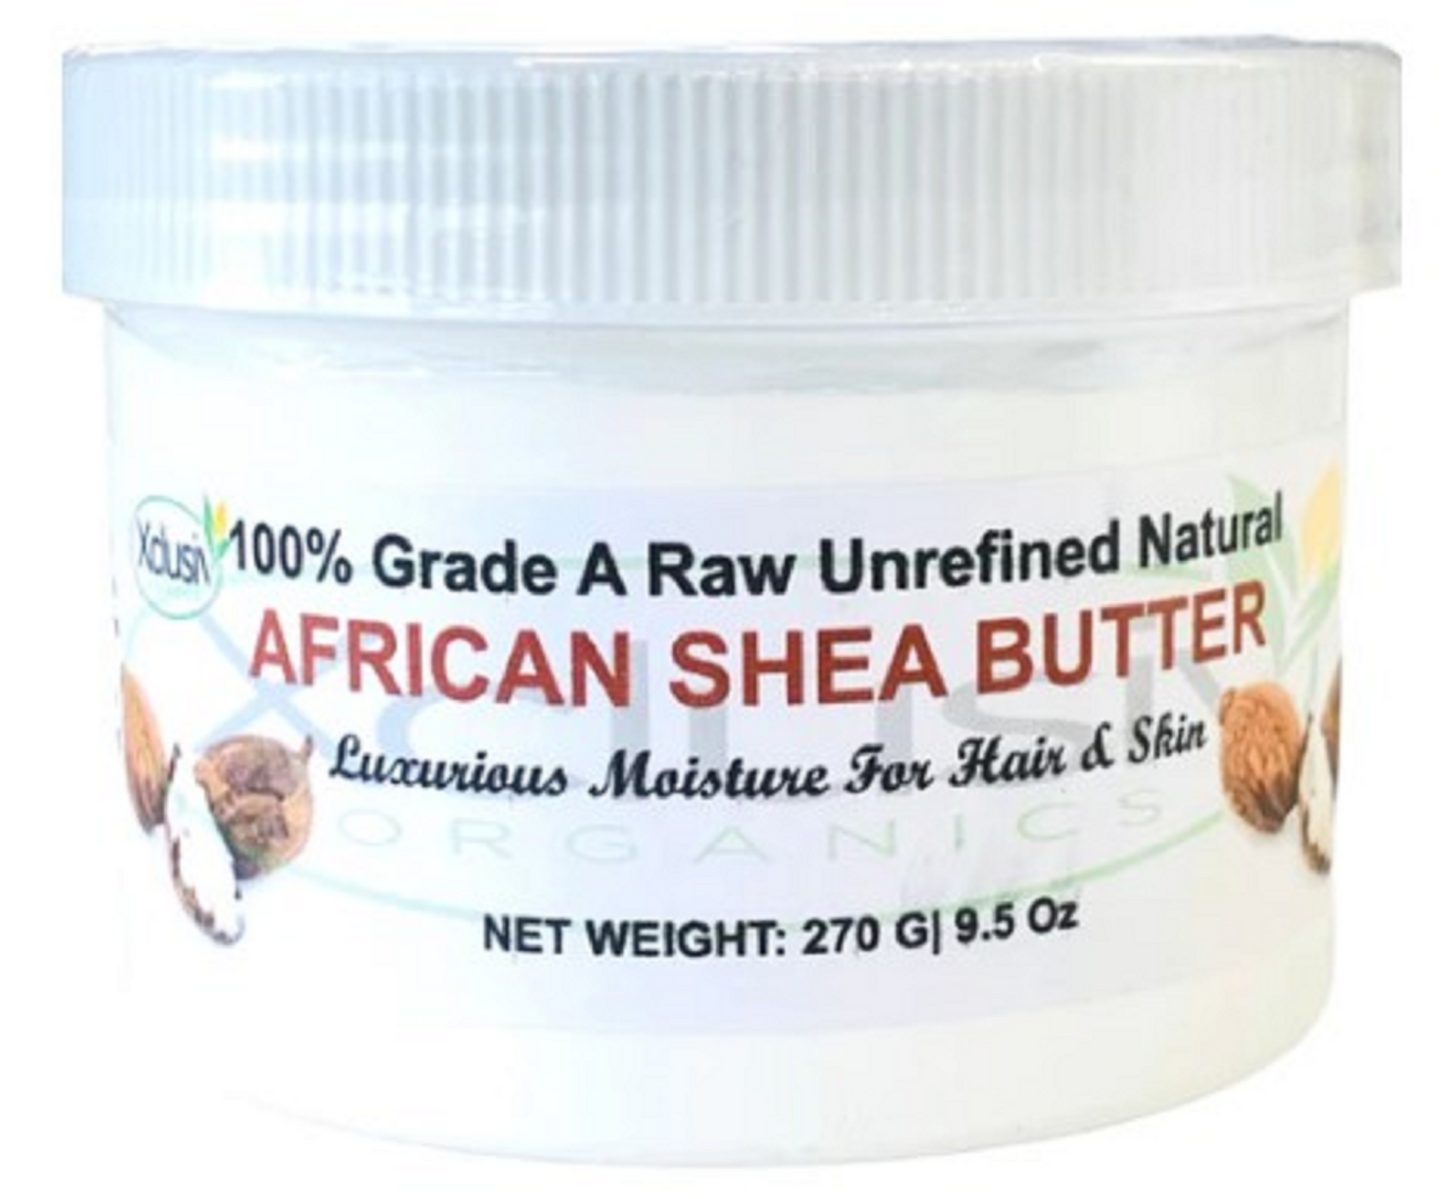 Raw Shea Butter Unrefined 270g x 12 Jars (Pack of 12 Jars)